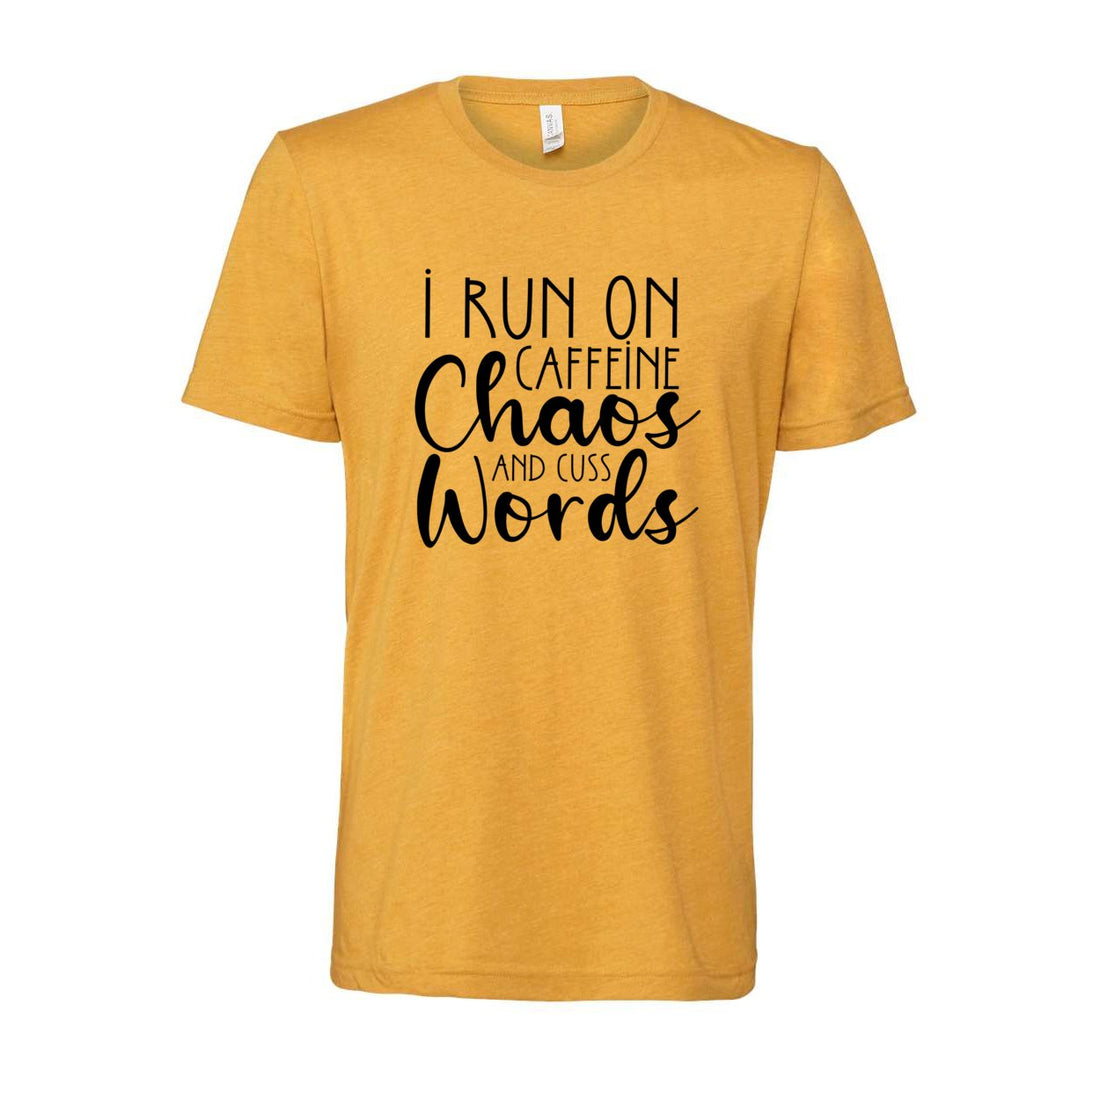 Chaos Jersey Tee - T-Shirts - Positively Sassy - Chaos Jersey Tee